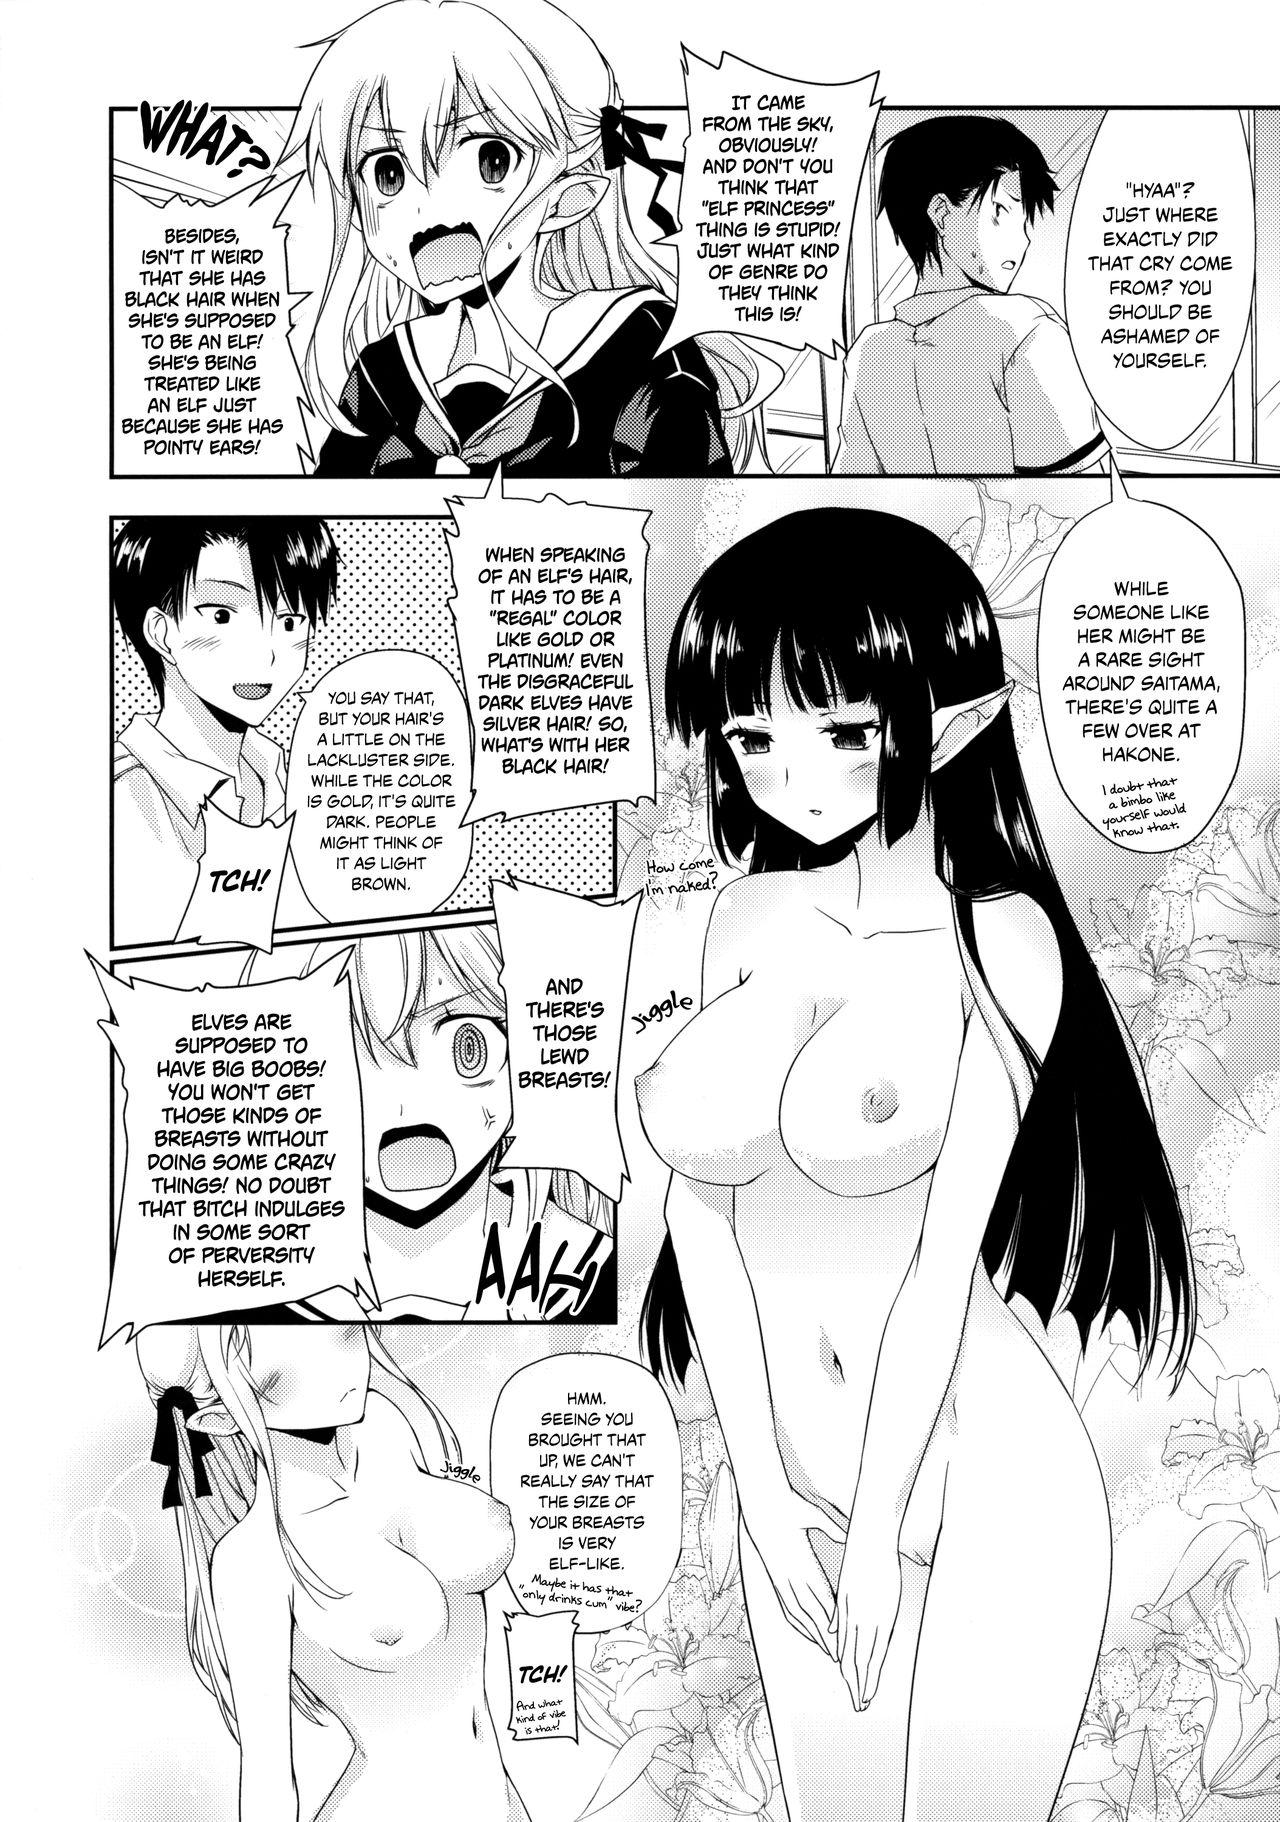 Straight Elf tte iu no wa! | The Thing About Elves! - Original Oral Sex - Page 5